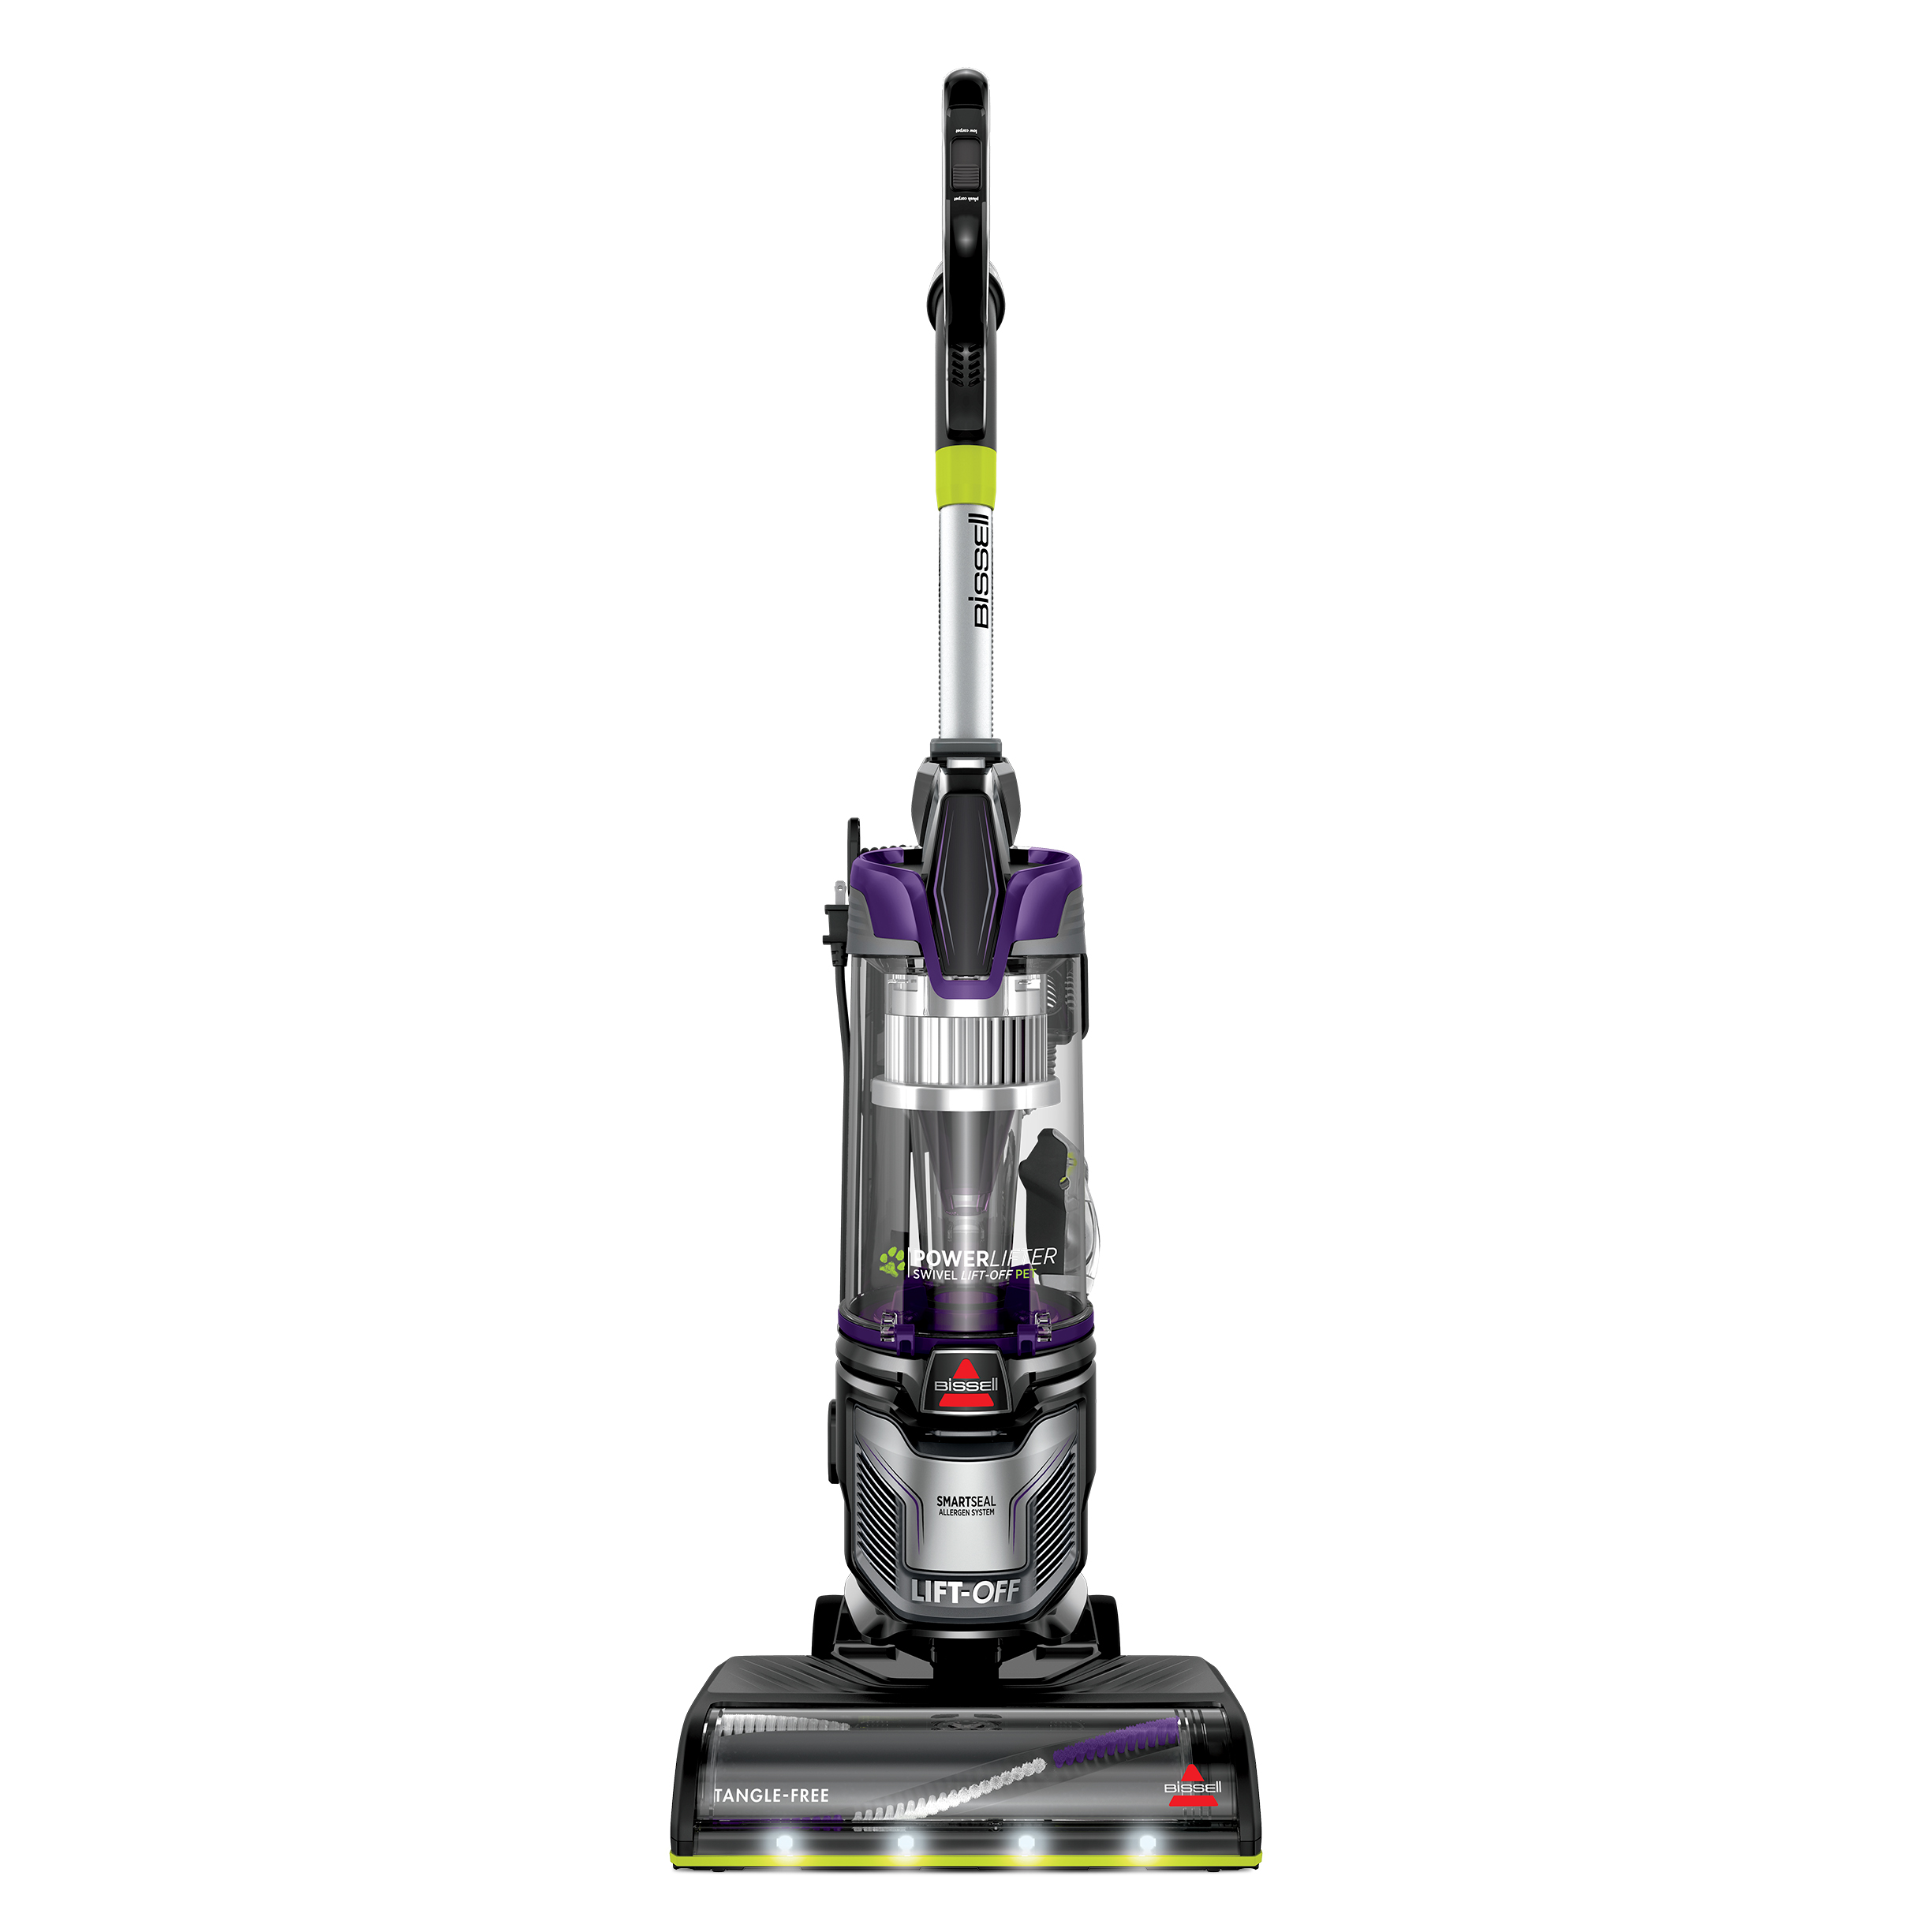 BISSELL PowerLifter Swivel Lift-Off Pet Upright Vacuum 2920F - image 1 of 8